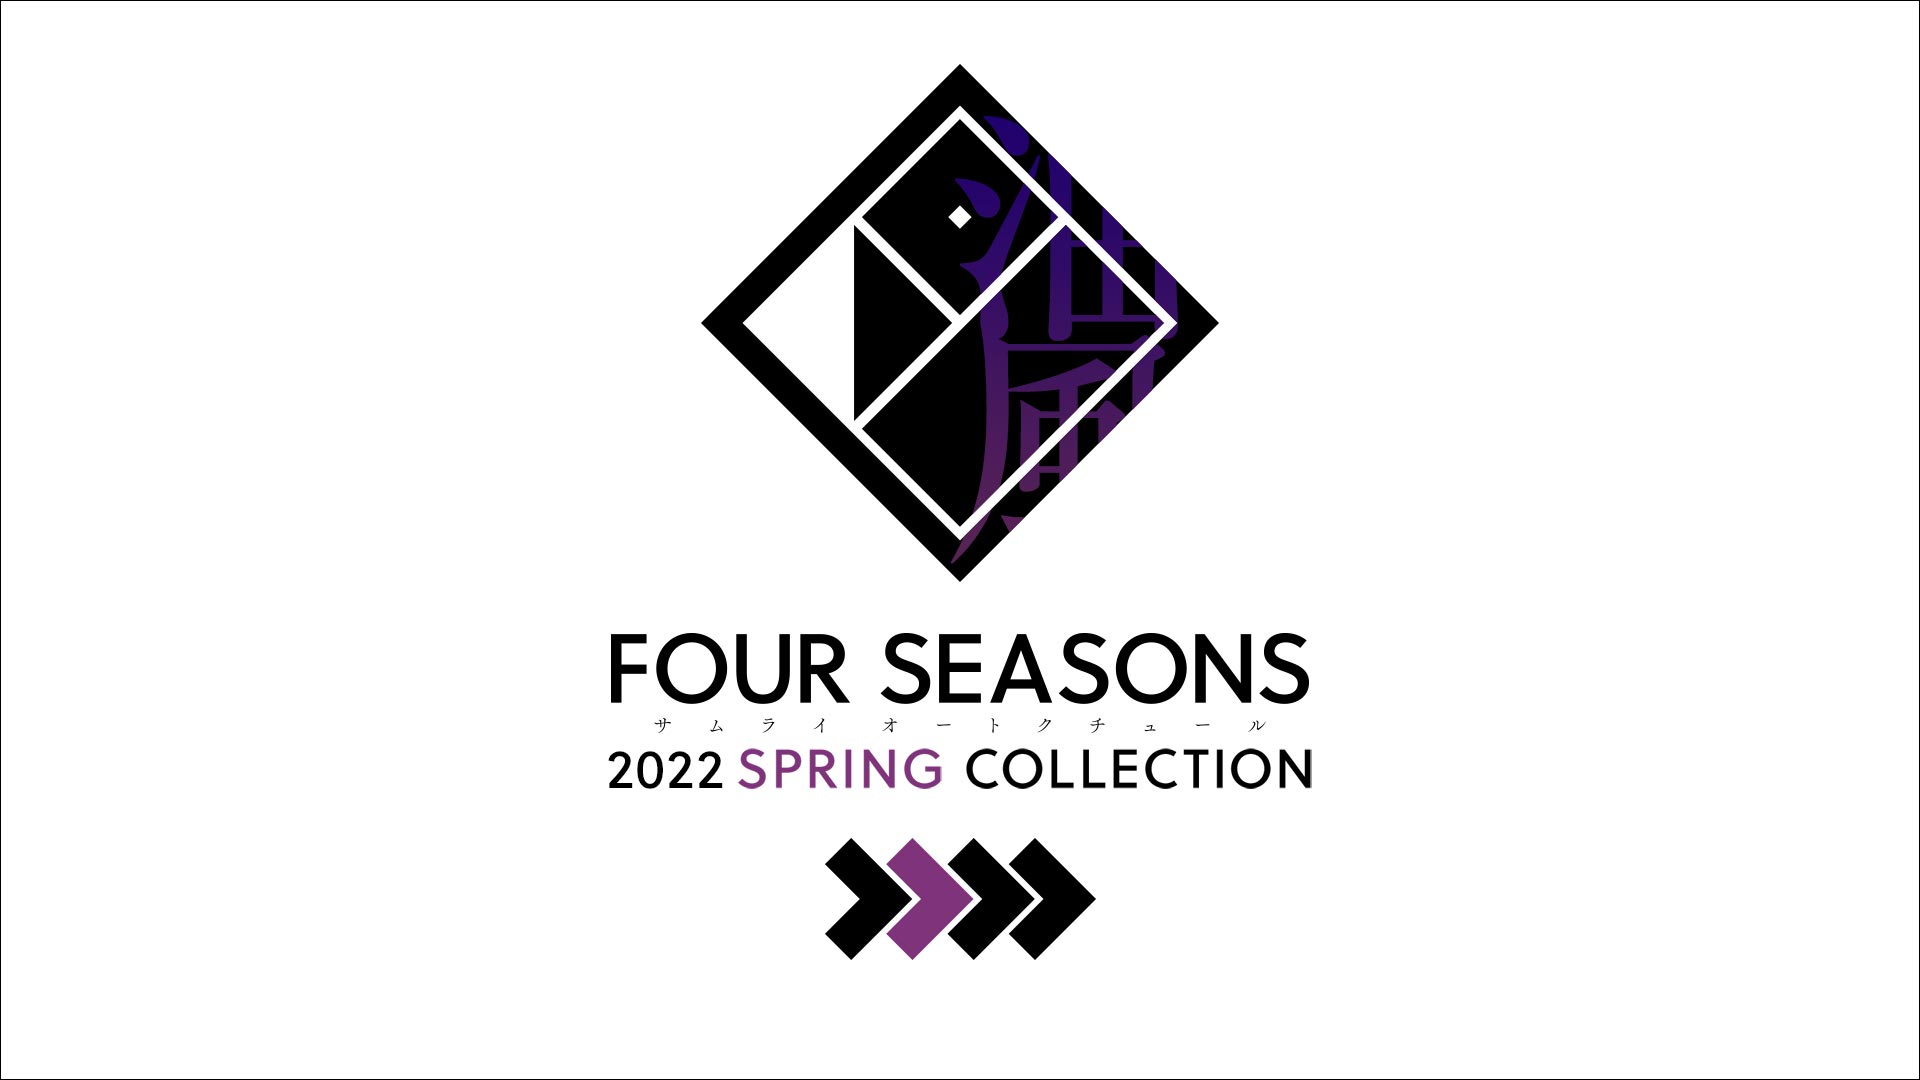 [PHOTO:FOUR SEASONS 2022 SPRING COLLECTION]